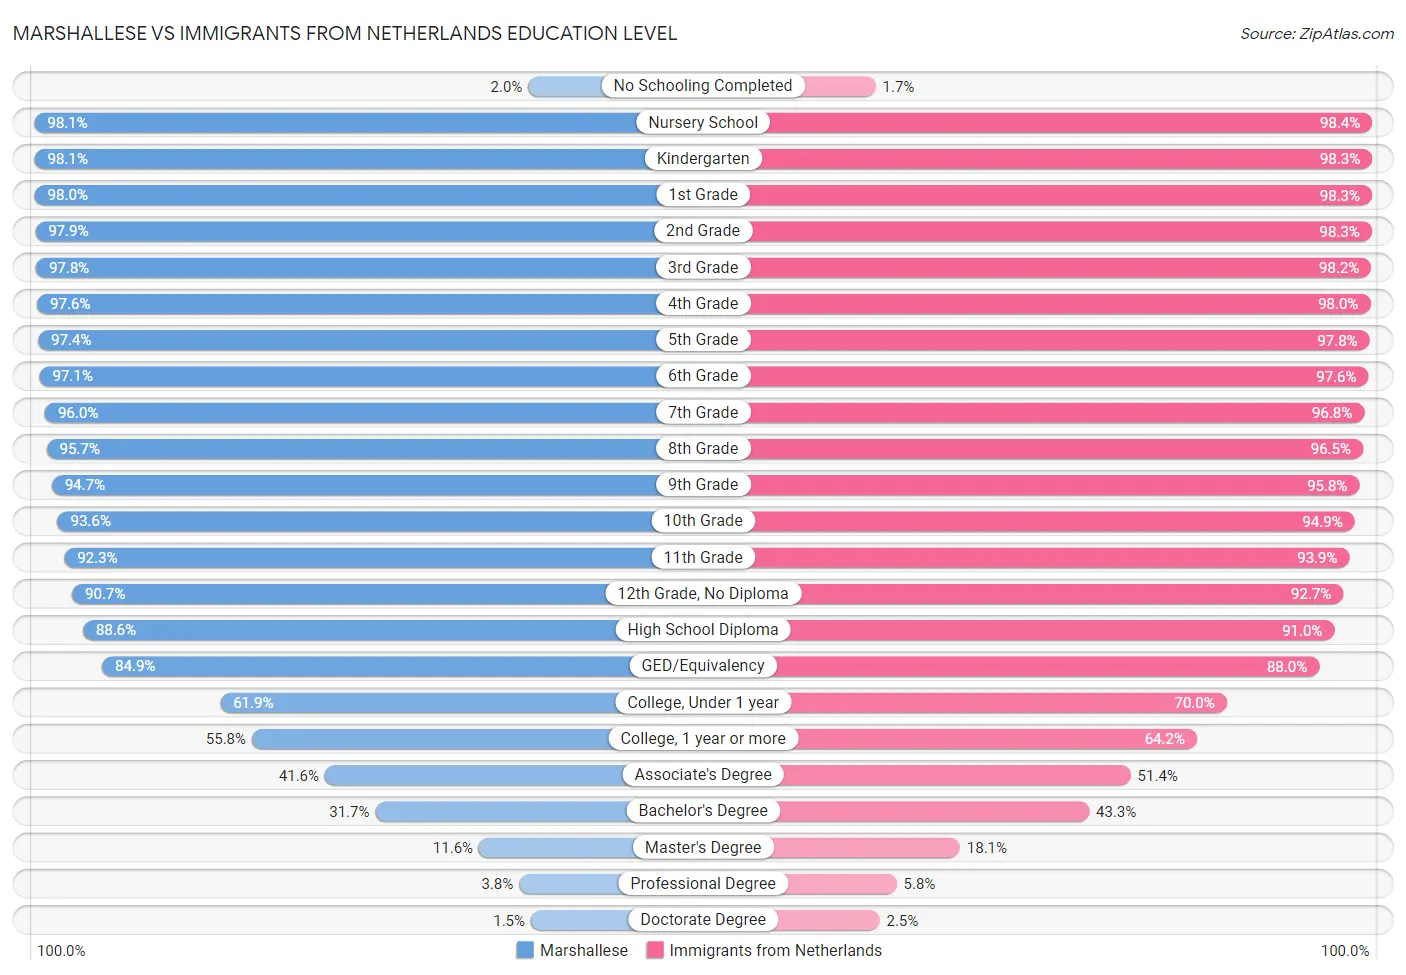 Marshallese vs Immigrants from Netherlands Education Level